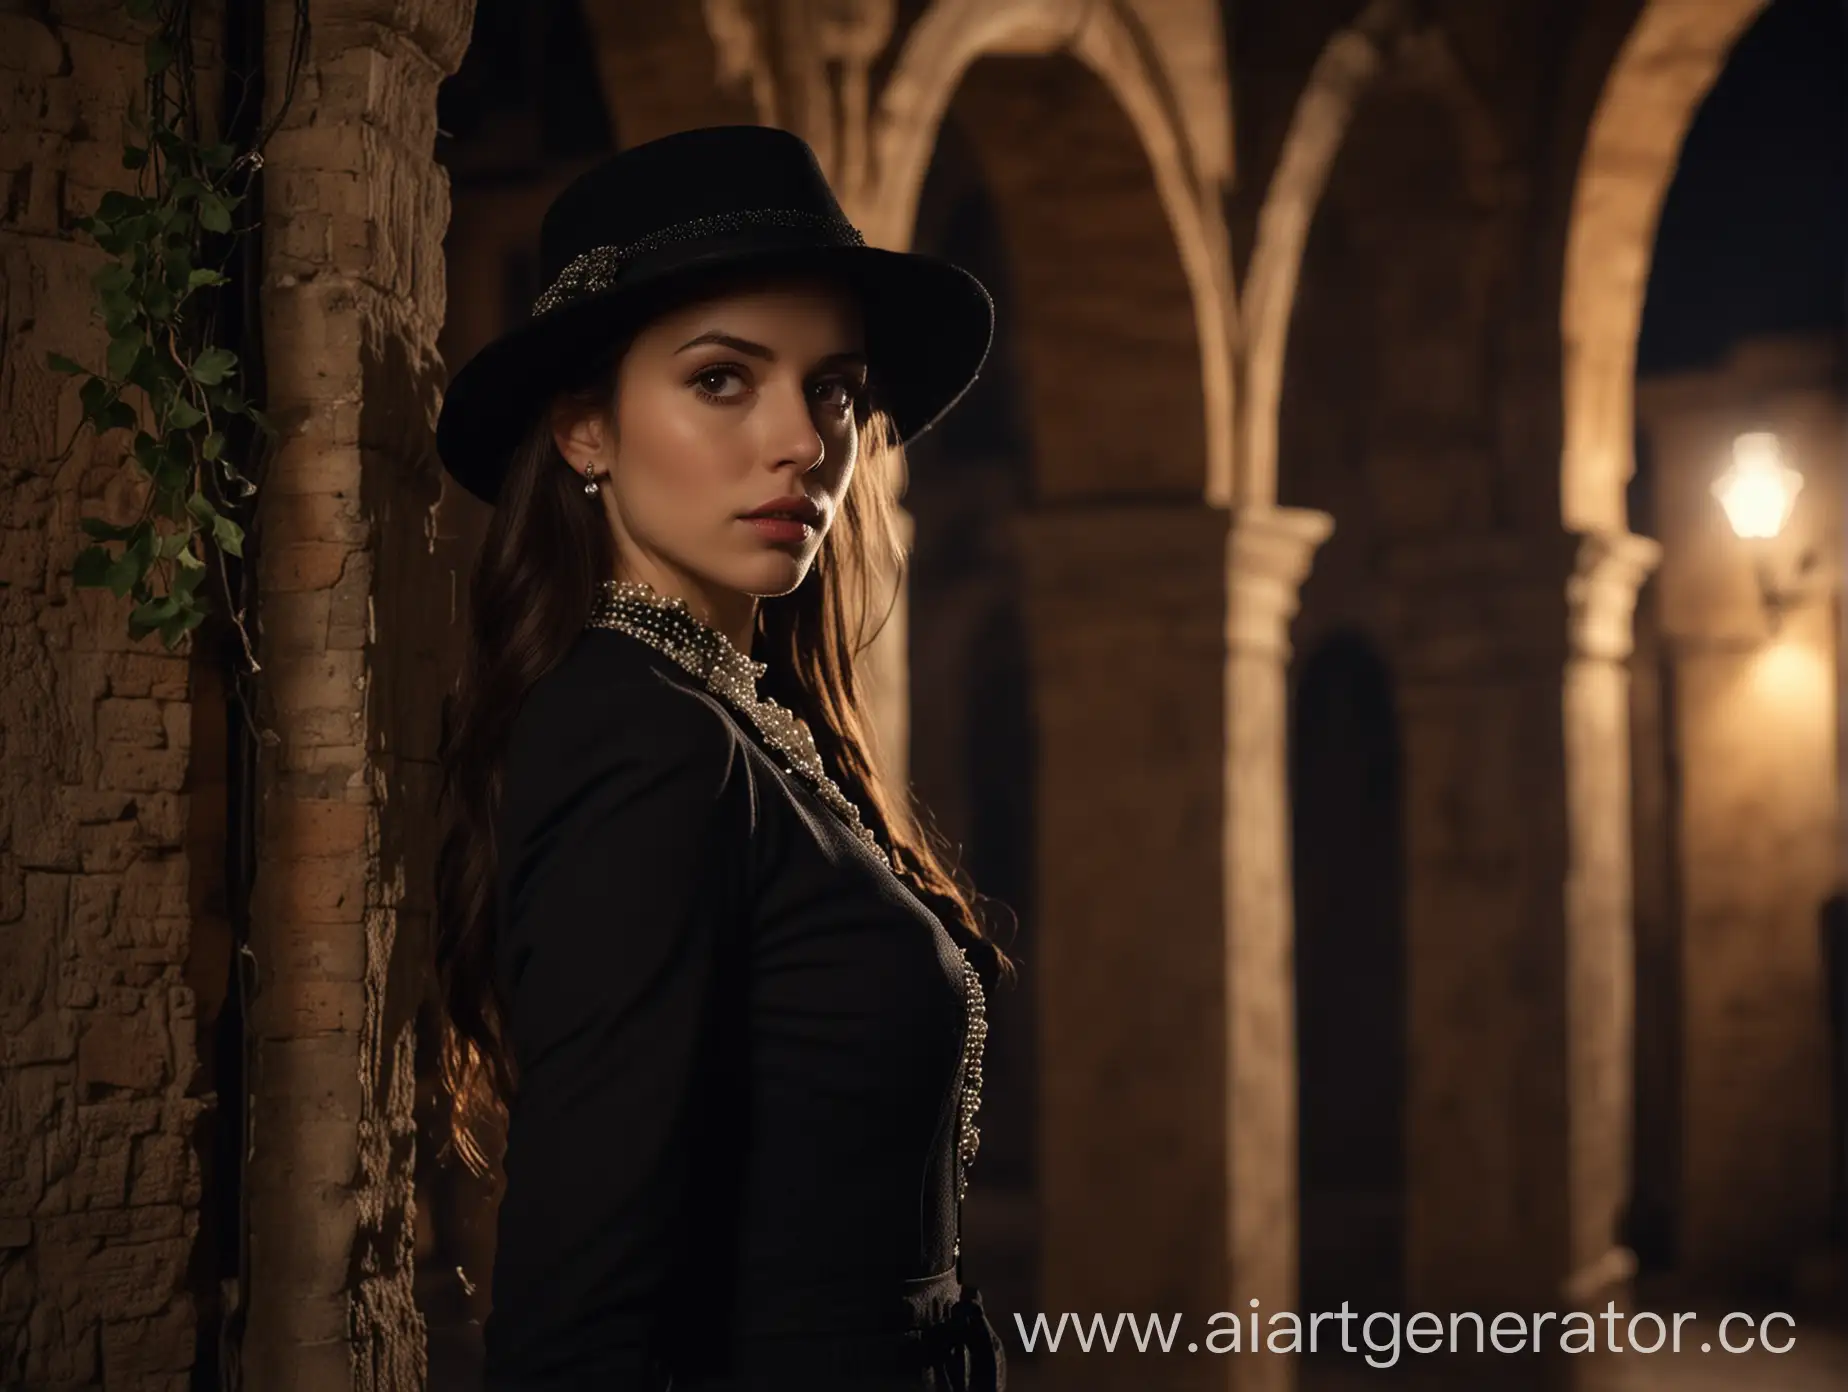 Cinematic still image, , heroine thief, old Italian street background, weathered arches, vineyards in soft focus, elegant dress decorated with pearls, black suit, fedora, old castle, symbolic props, dramatic shadow play, emotional tension, romantic atmosphere, chiaroscuro night lighting, delicate vine patterns, 35 mm, depth of field, back lighting